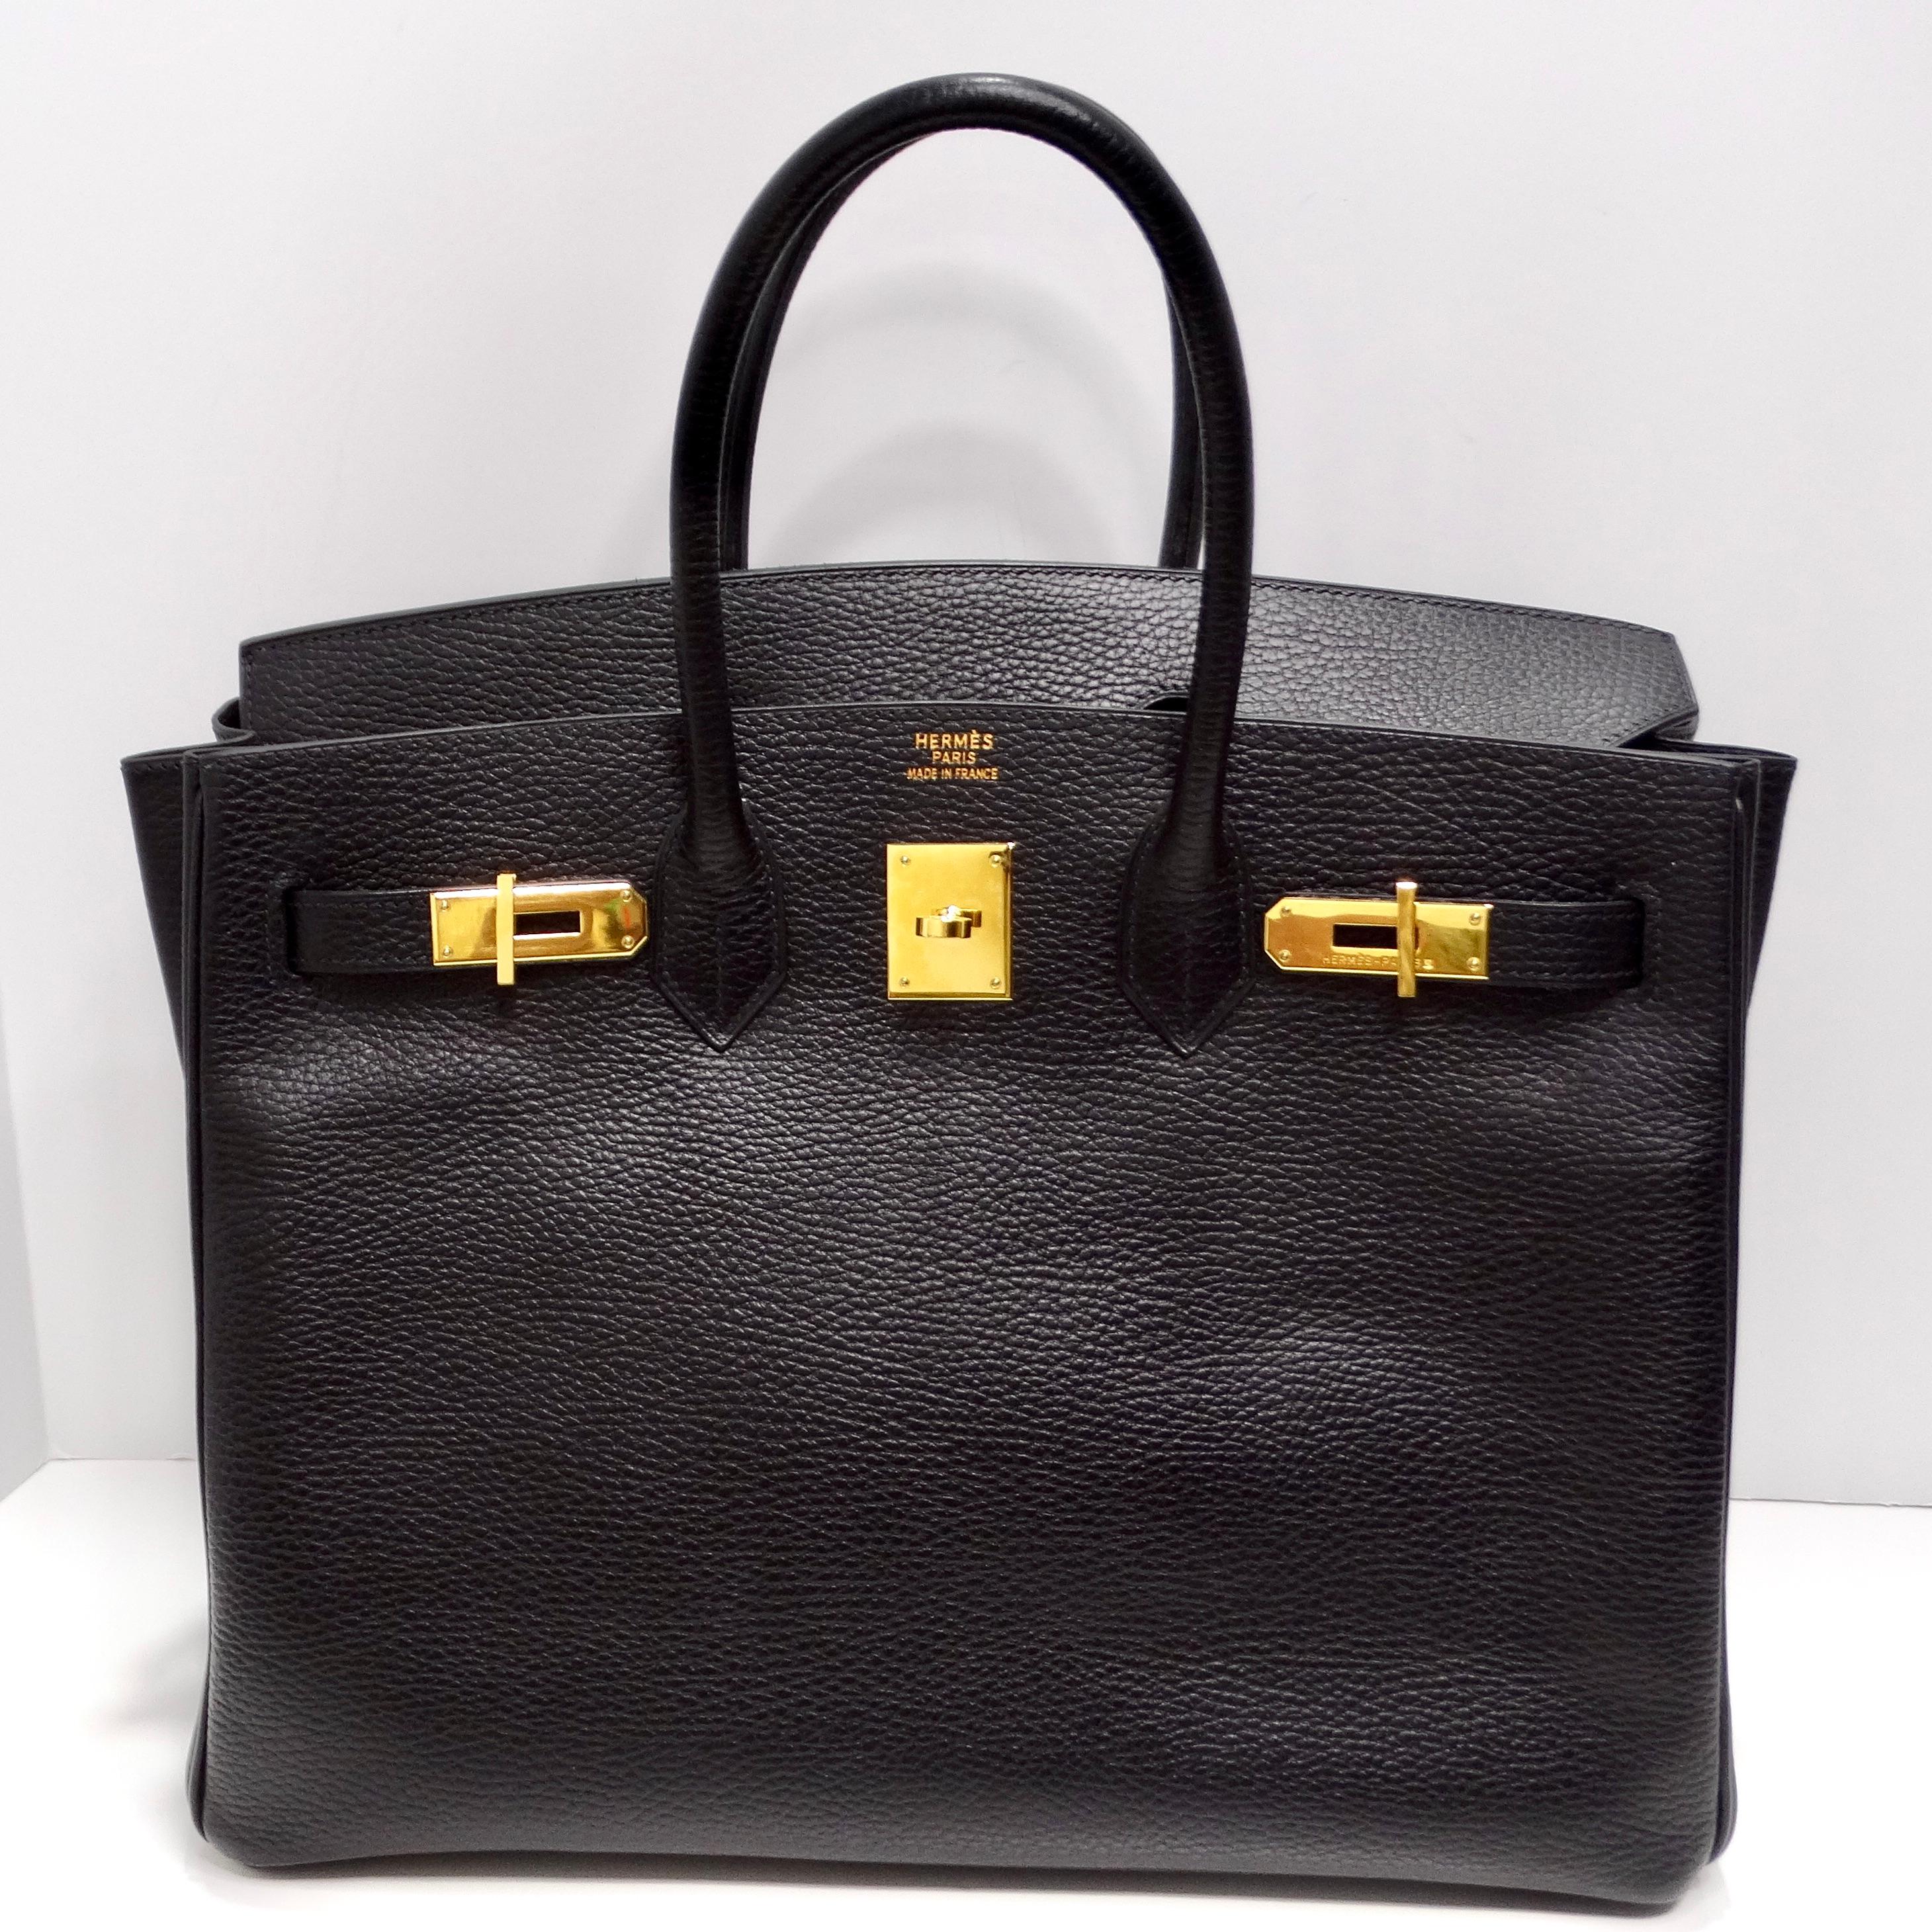 The Hermes Birkin 35 in Ardennes Leather Black is indeed an iconic and timeless piece that exudes luxury and sophistication.

Crafted from luxurious Ardennes leather in classic black, this Birkin epitomizes understated elegance and versatility. The